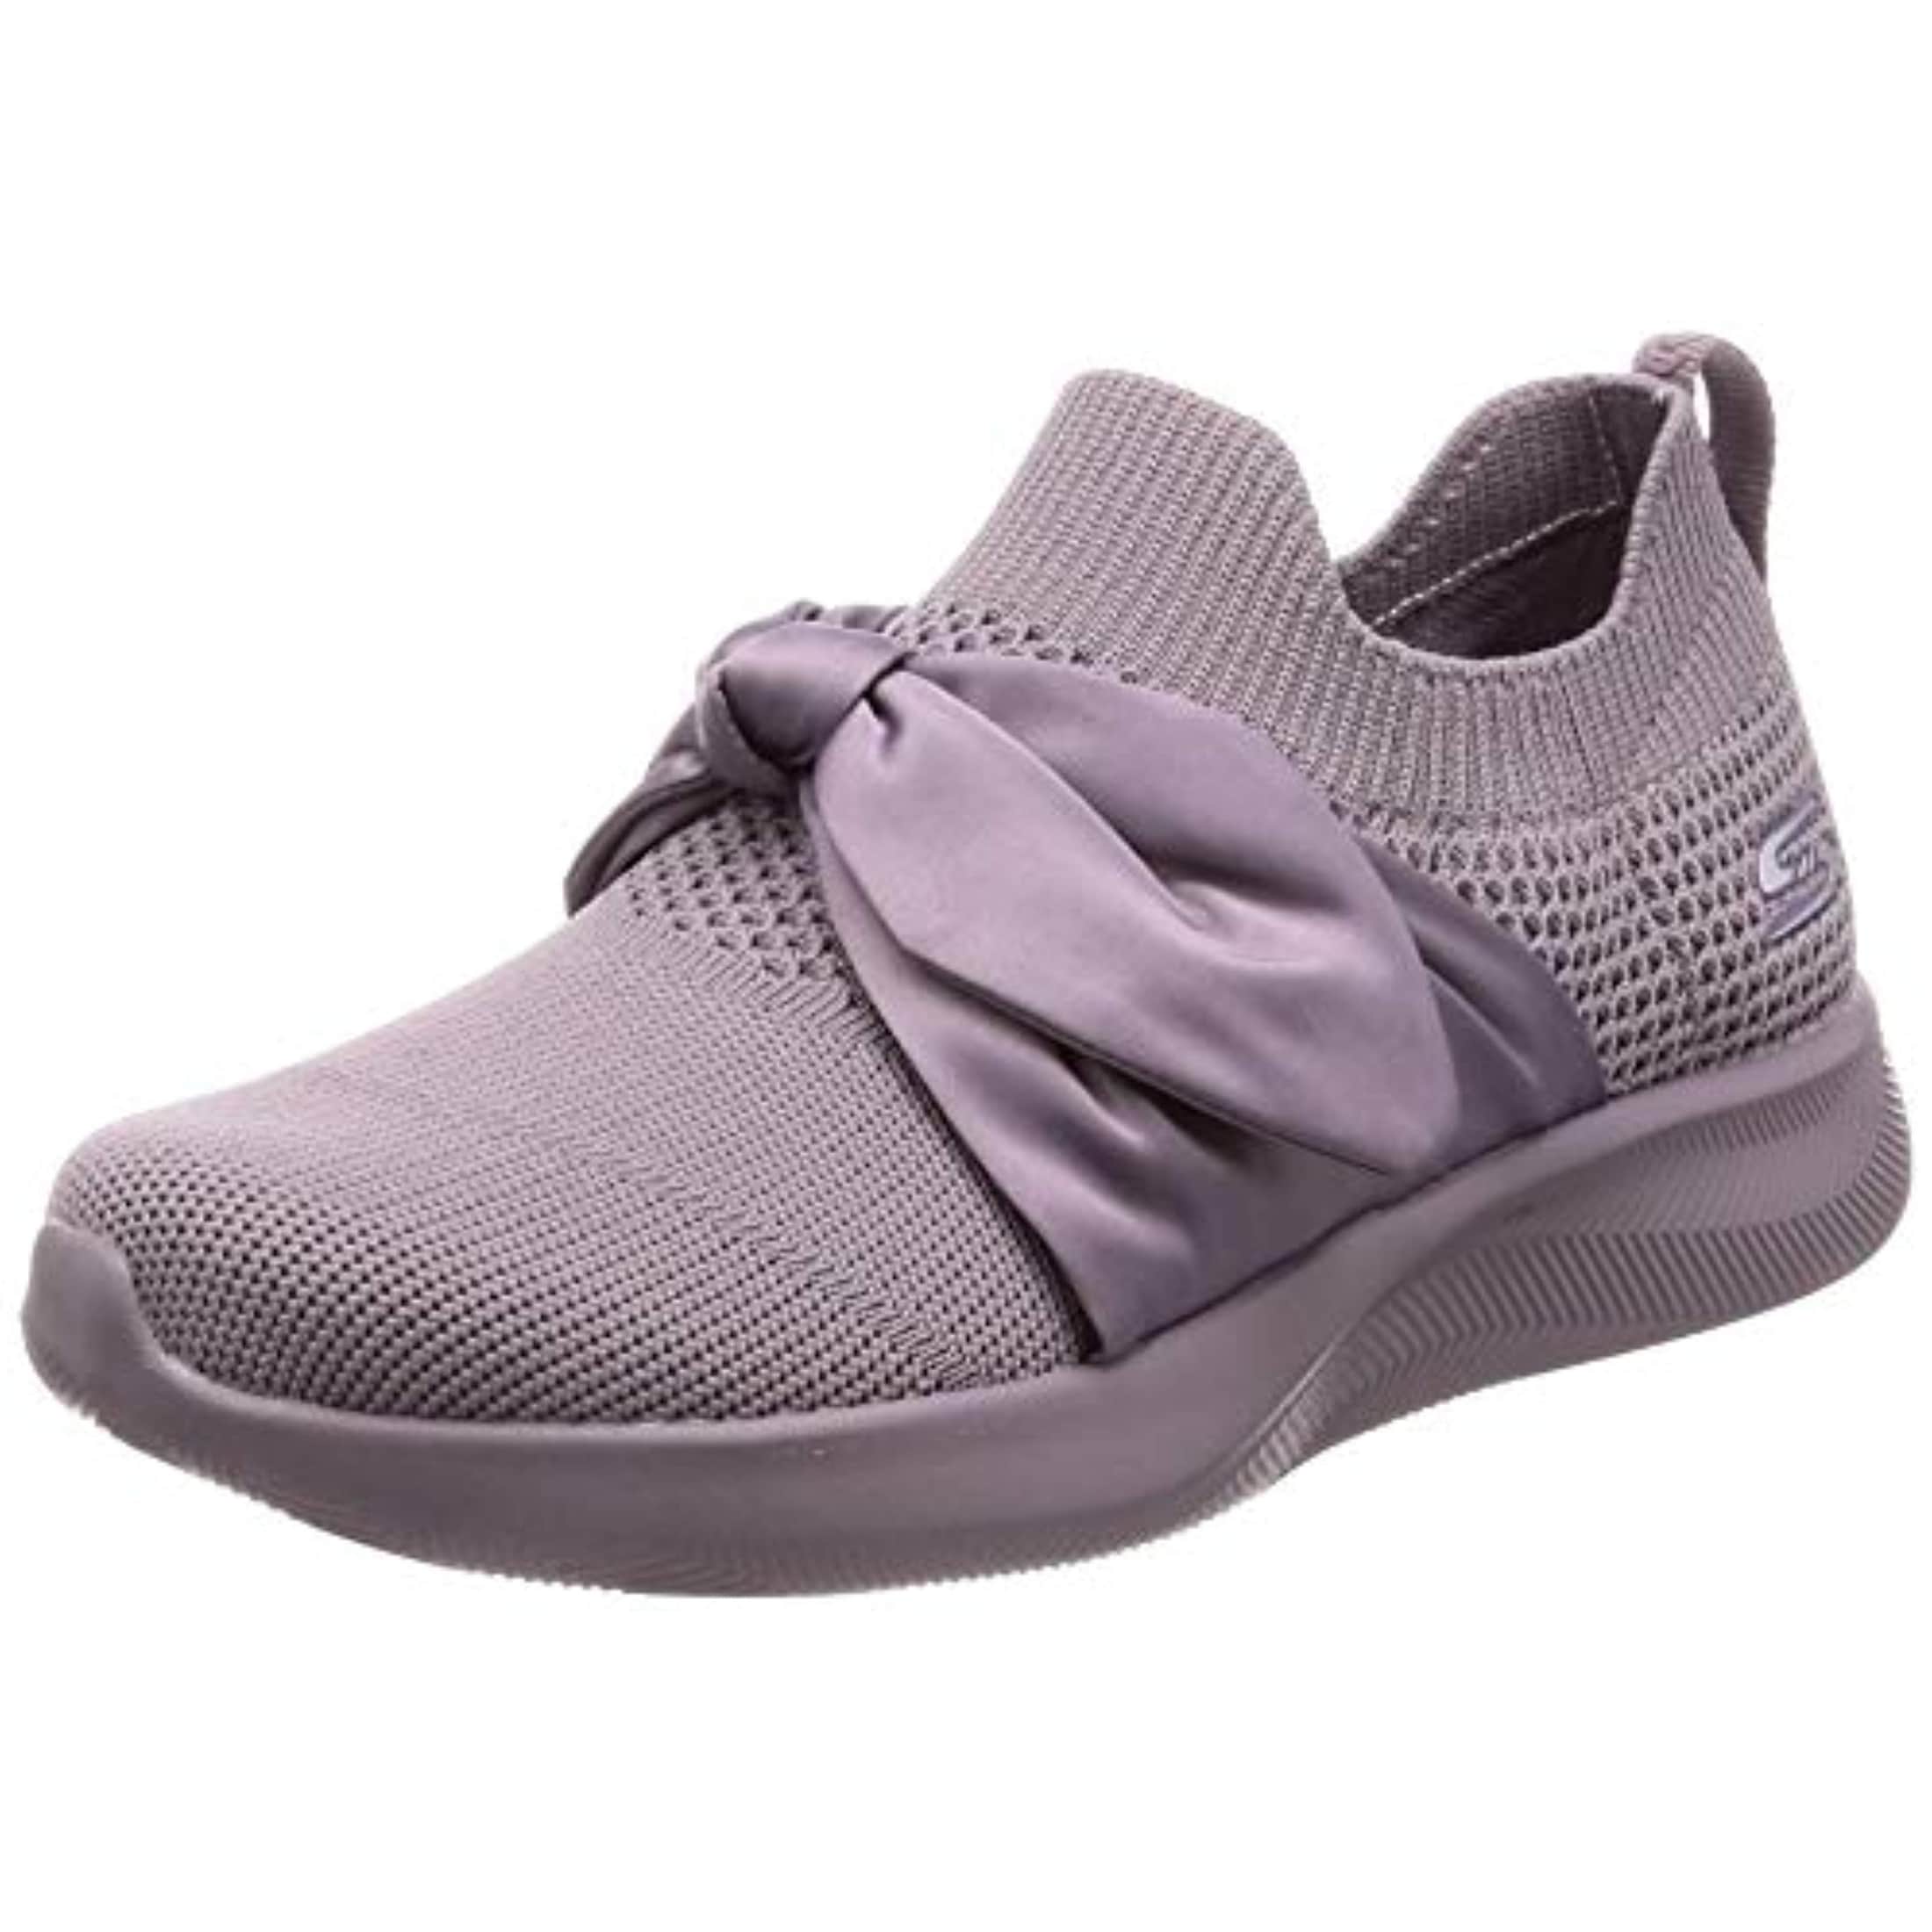 womens slip on shoes with bow